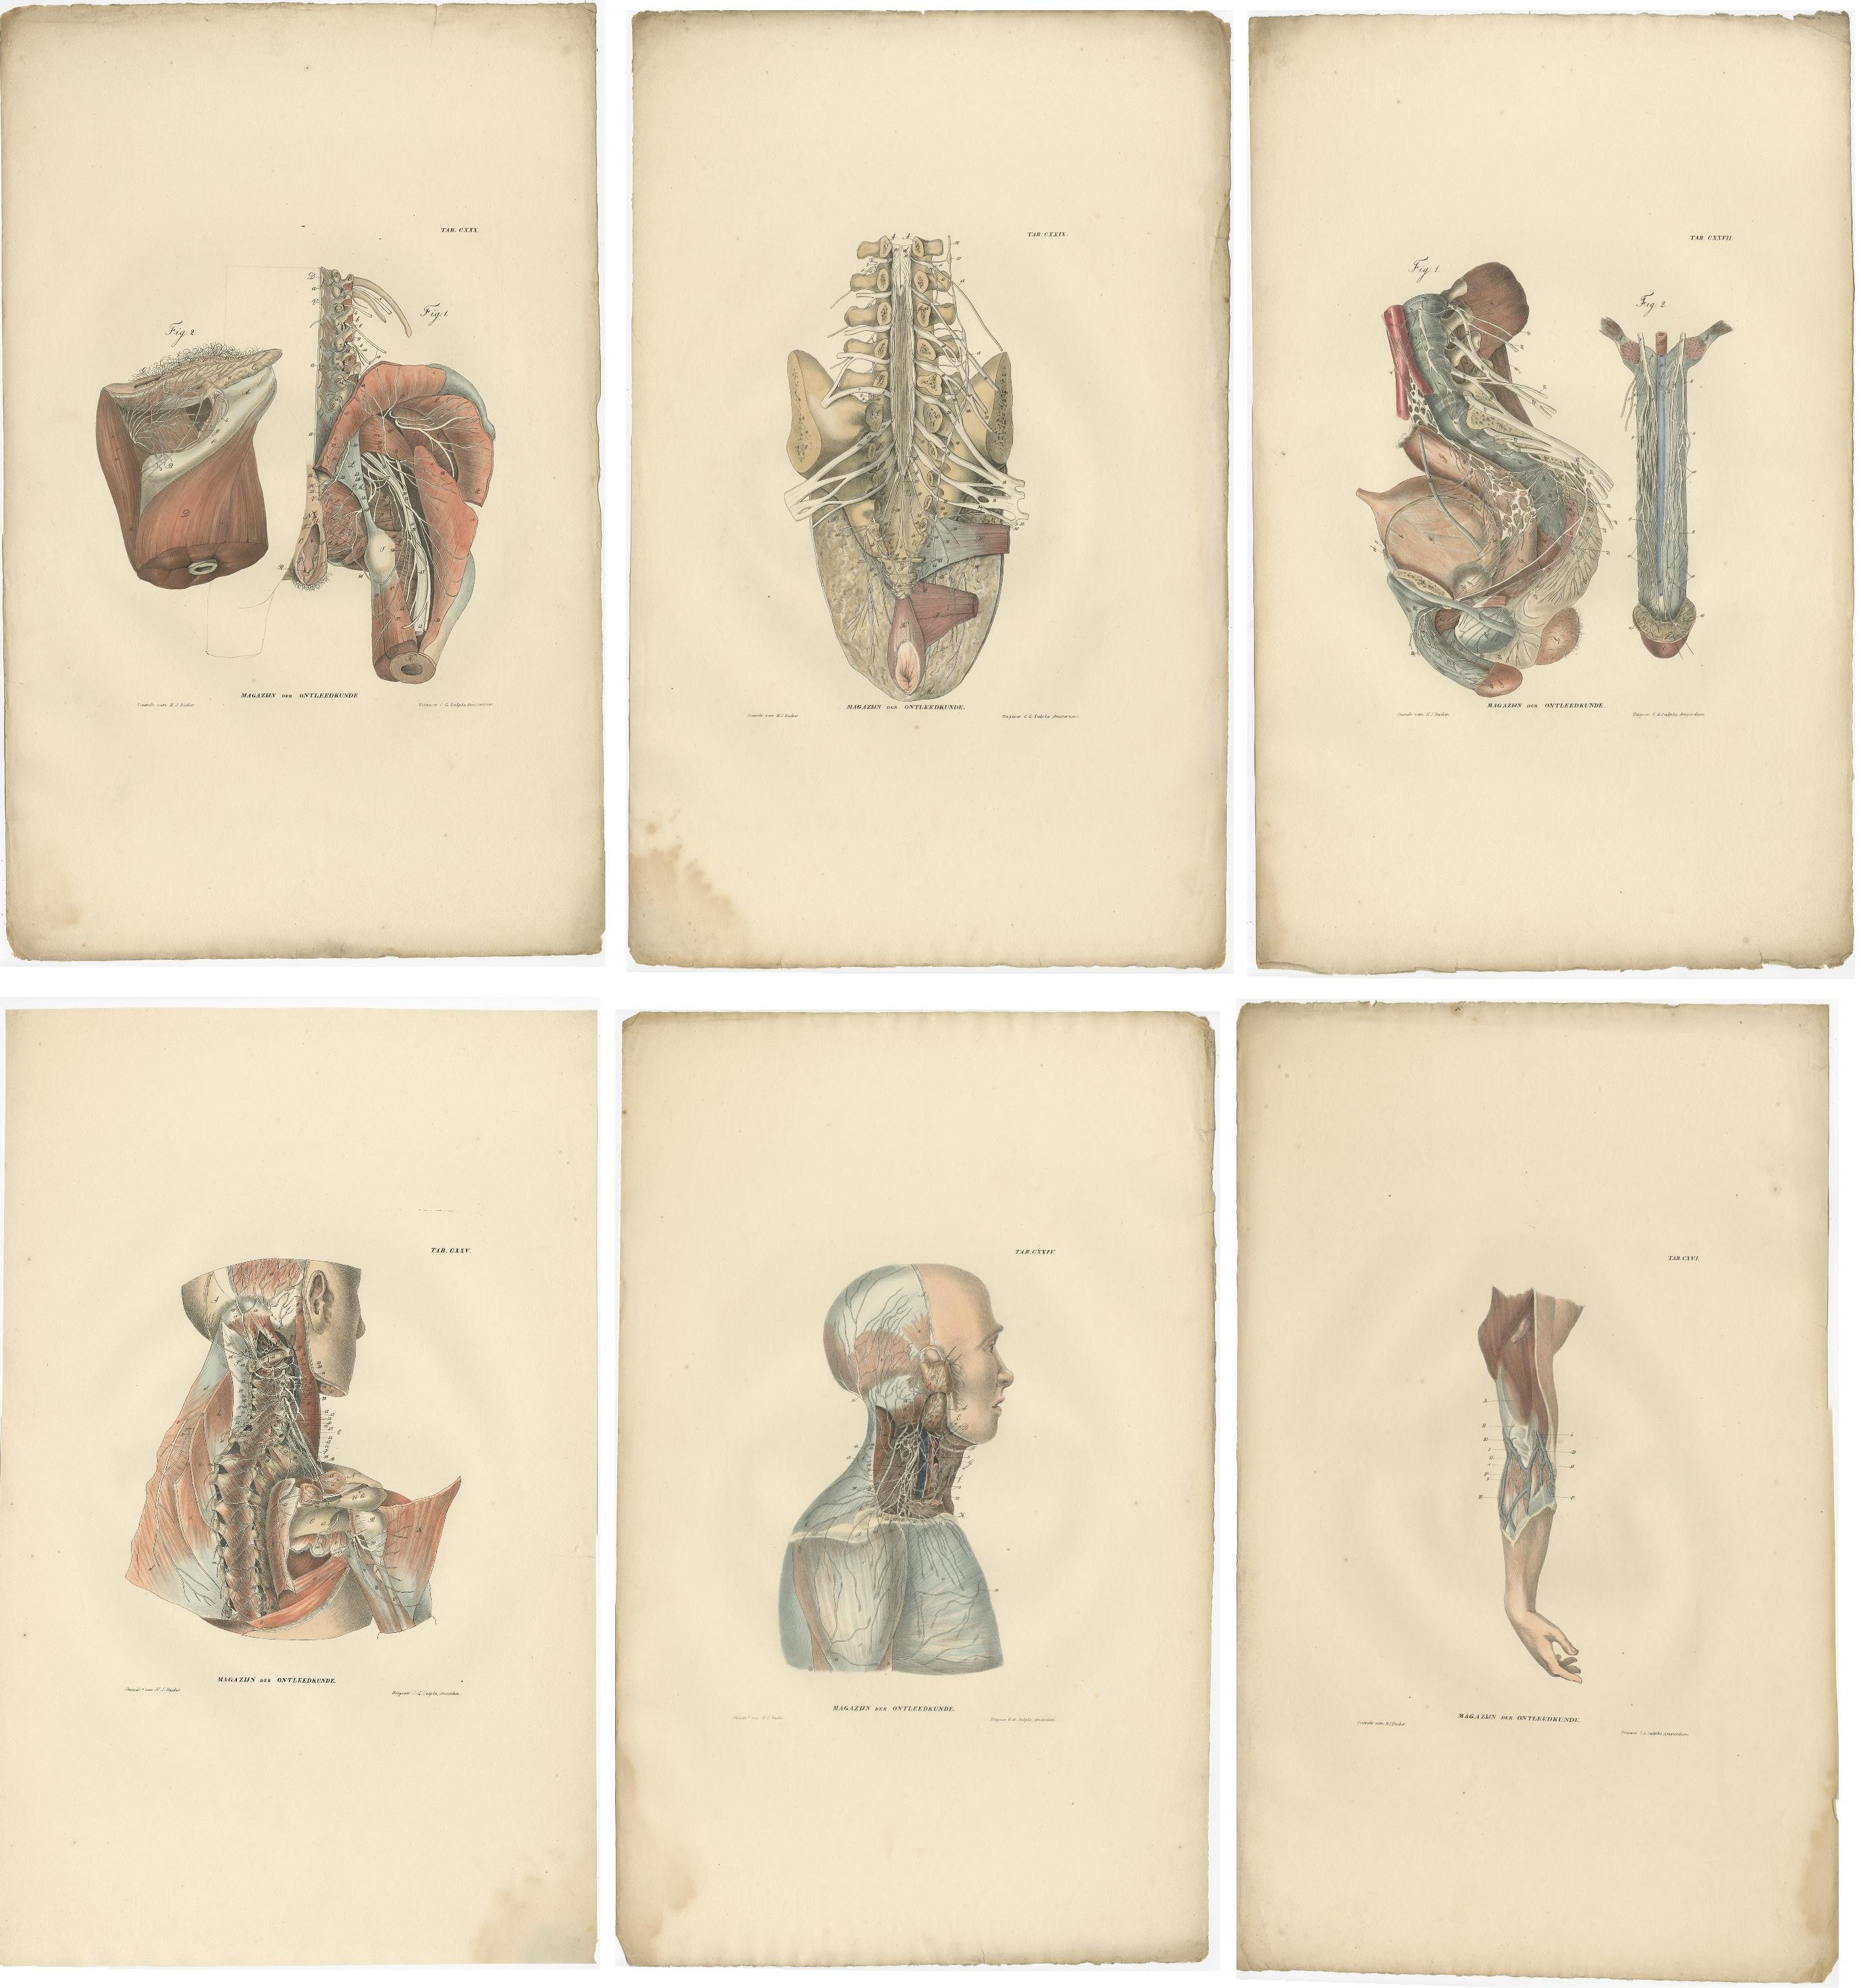 Set of 23 antique anatomy prints of the nervous system of the human body. These prints originate from 'Magazijn van ontleedkunde' by Dr. Th. Richter. Published 1839.